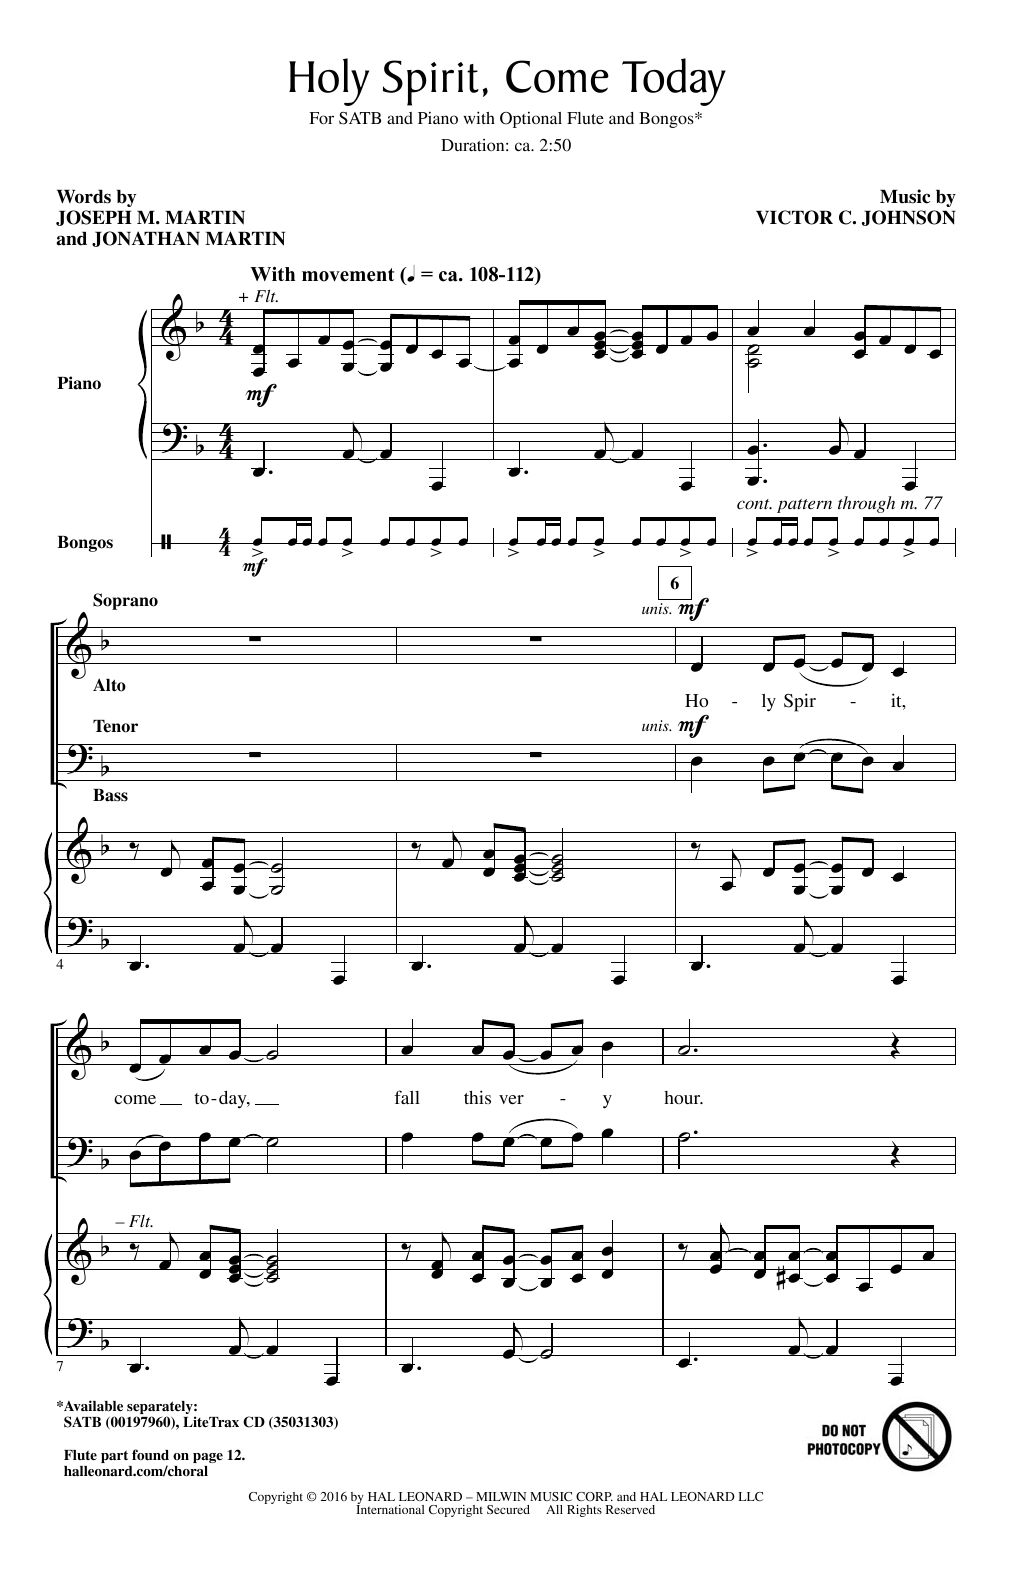 Download Victor C. Johnson Holy Spirit, Come Today Sheet Music